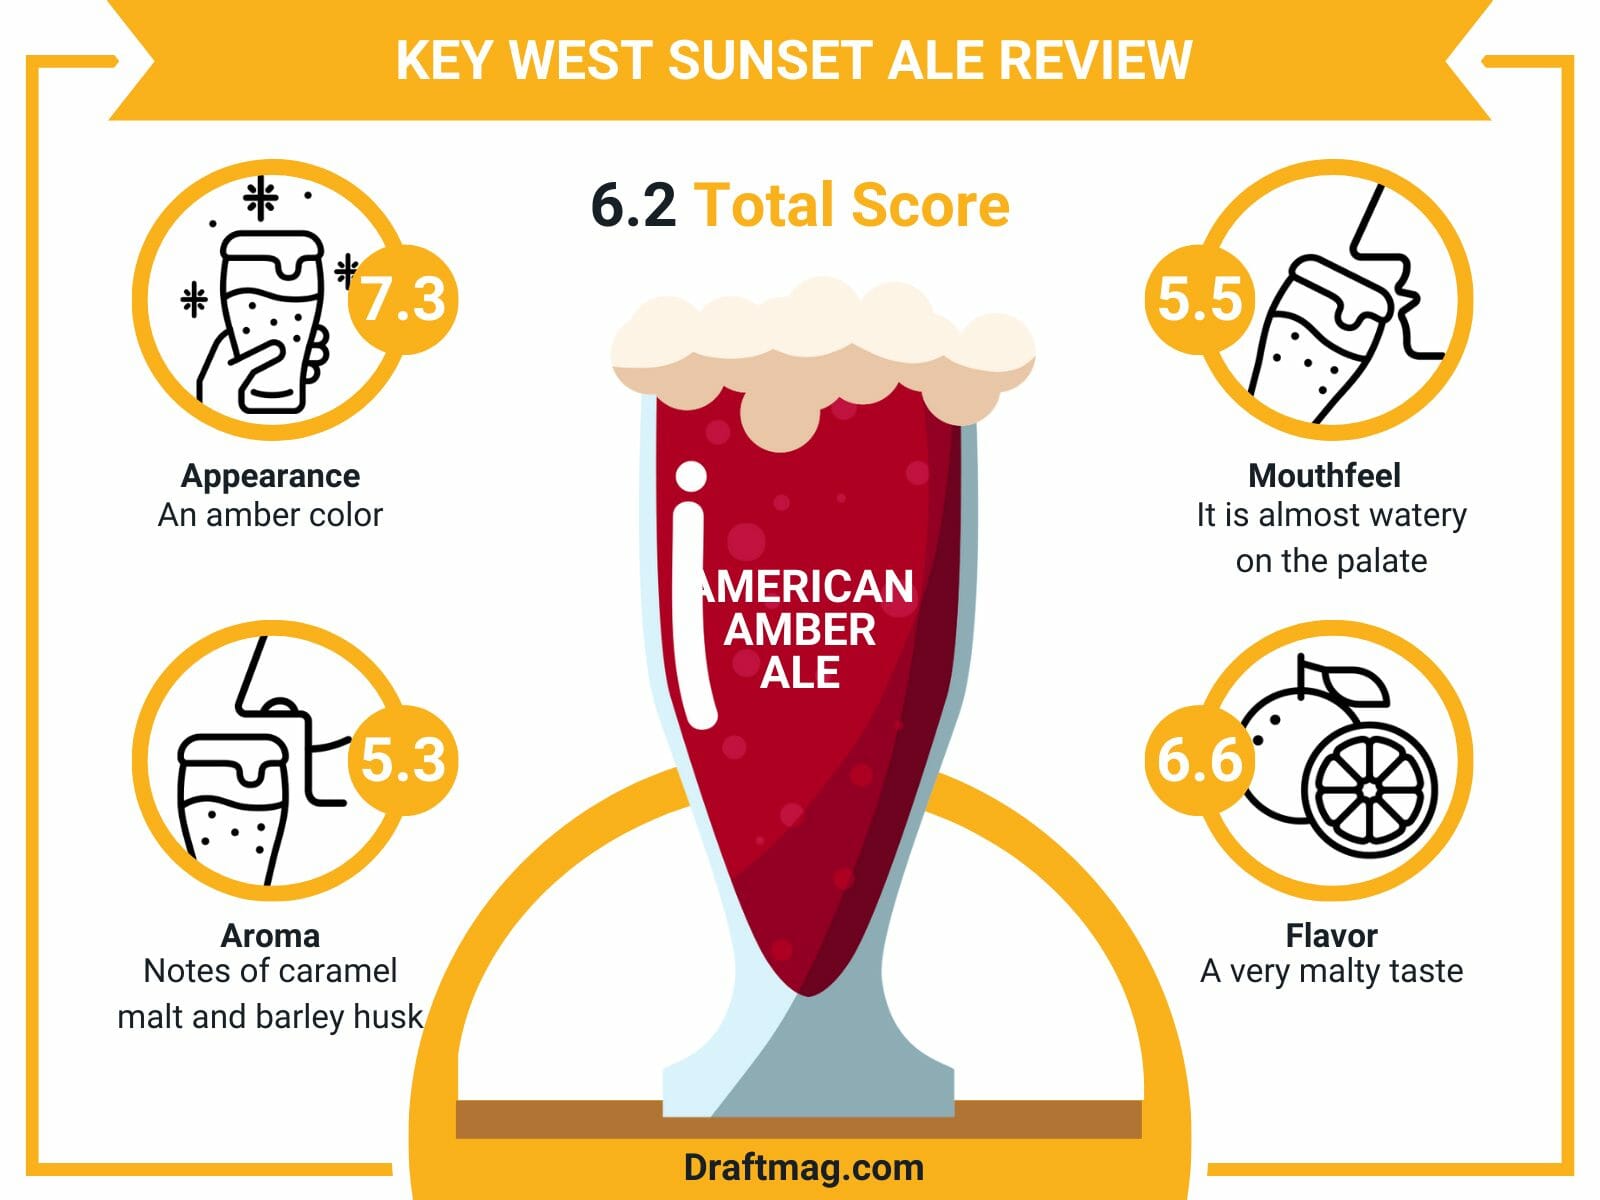 Key west sunset ale review infographic